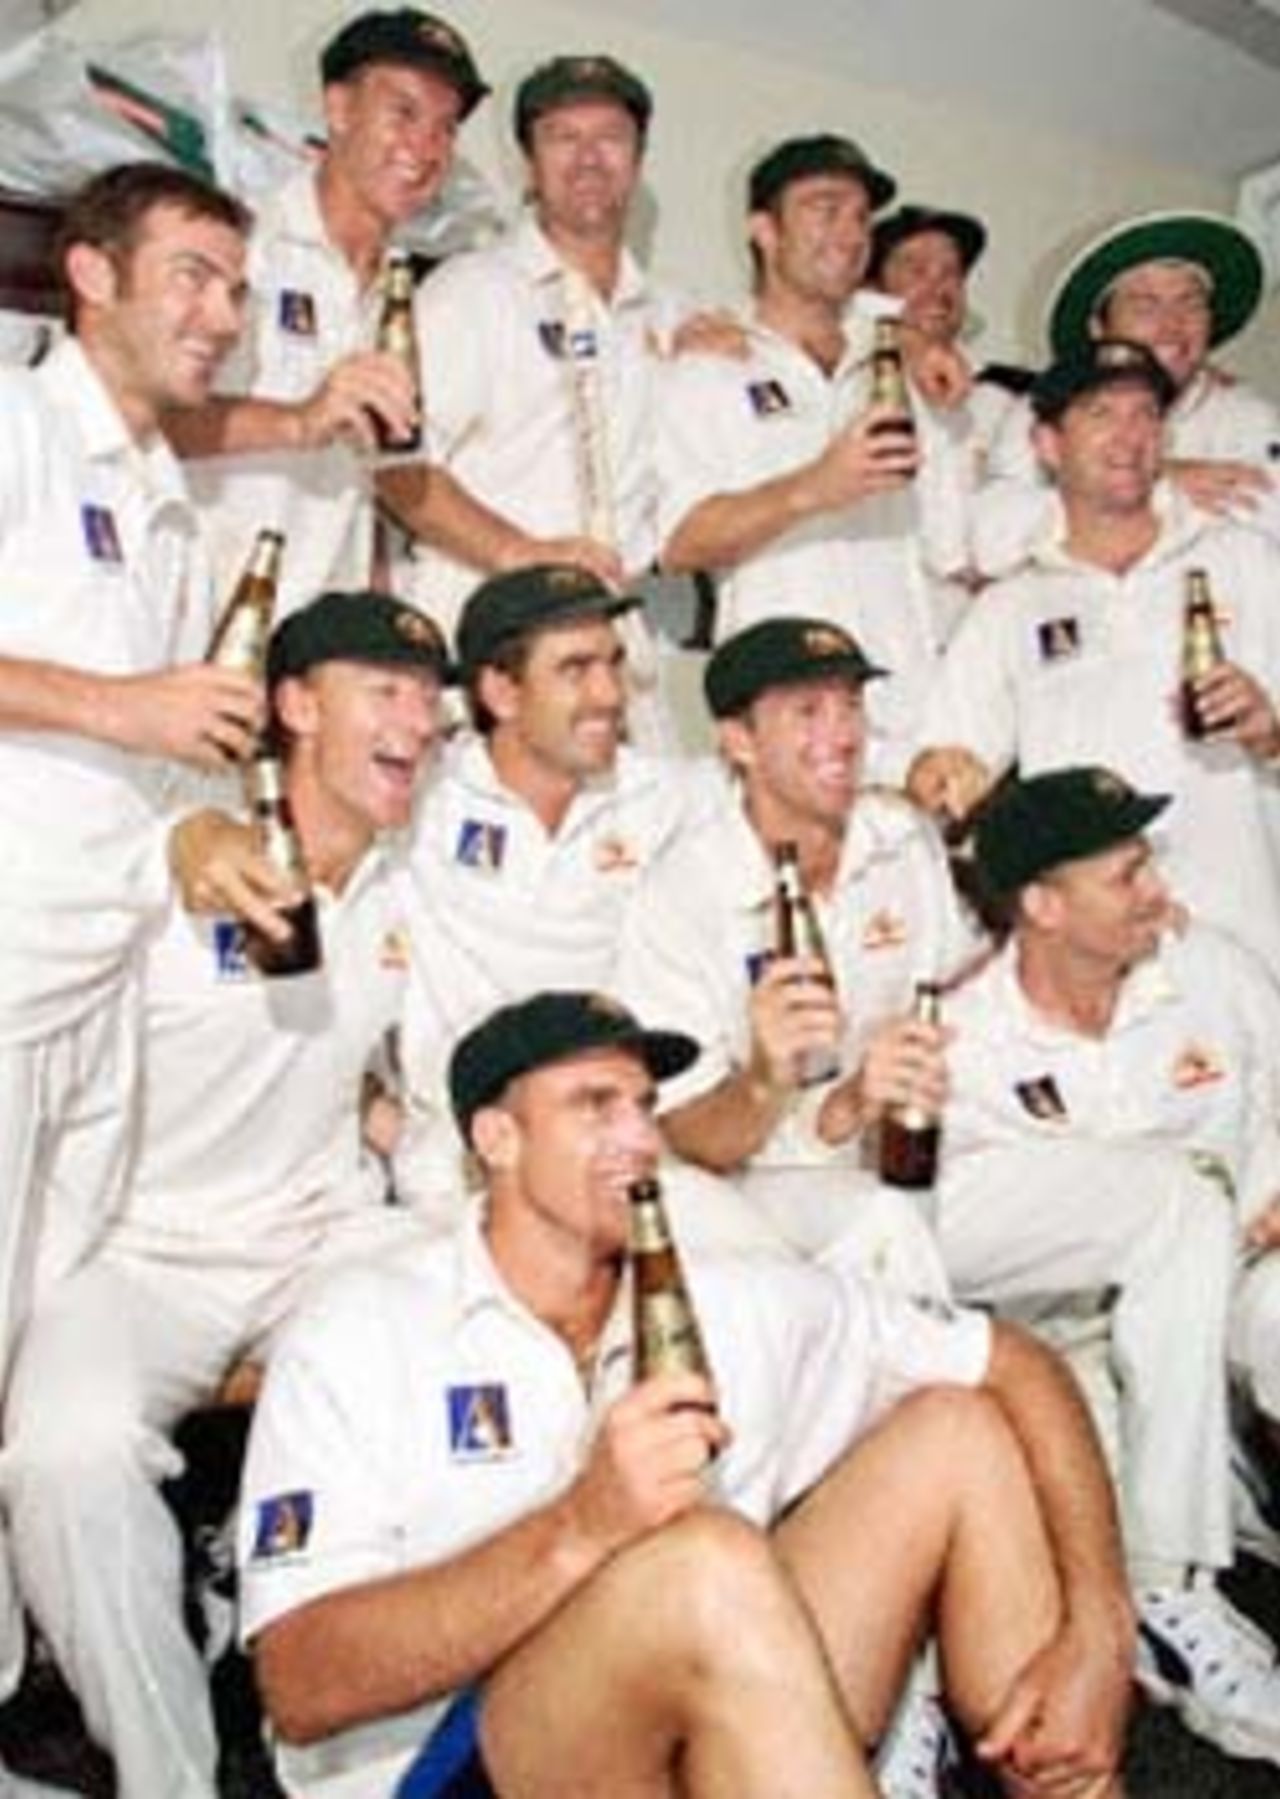 The Australian team celebrates after defeating the West Indies by an inning and 126 runs on the third day of the first Test match at the Gabba in Brisbane, 25 November 2000. The Australian victory equals the world record of eleven consecutive Test victories.